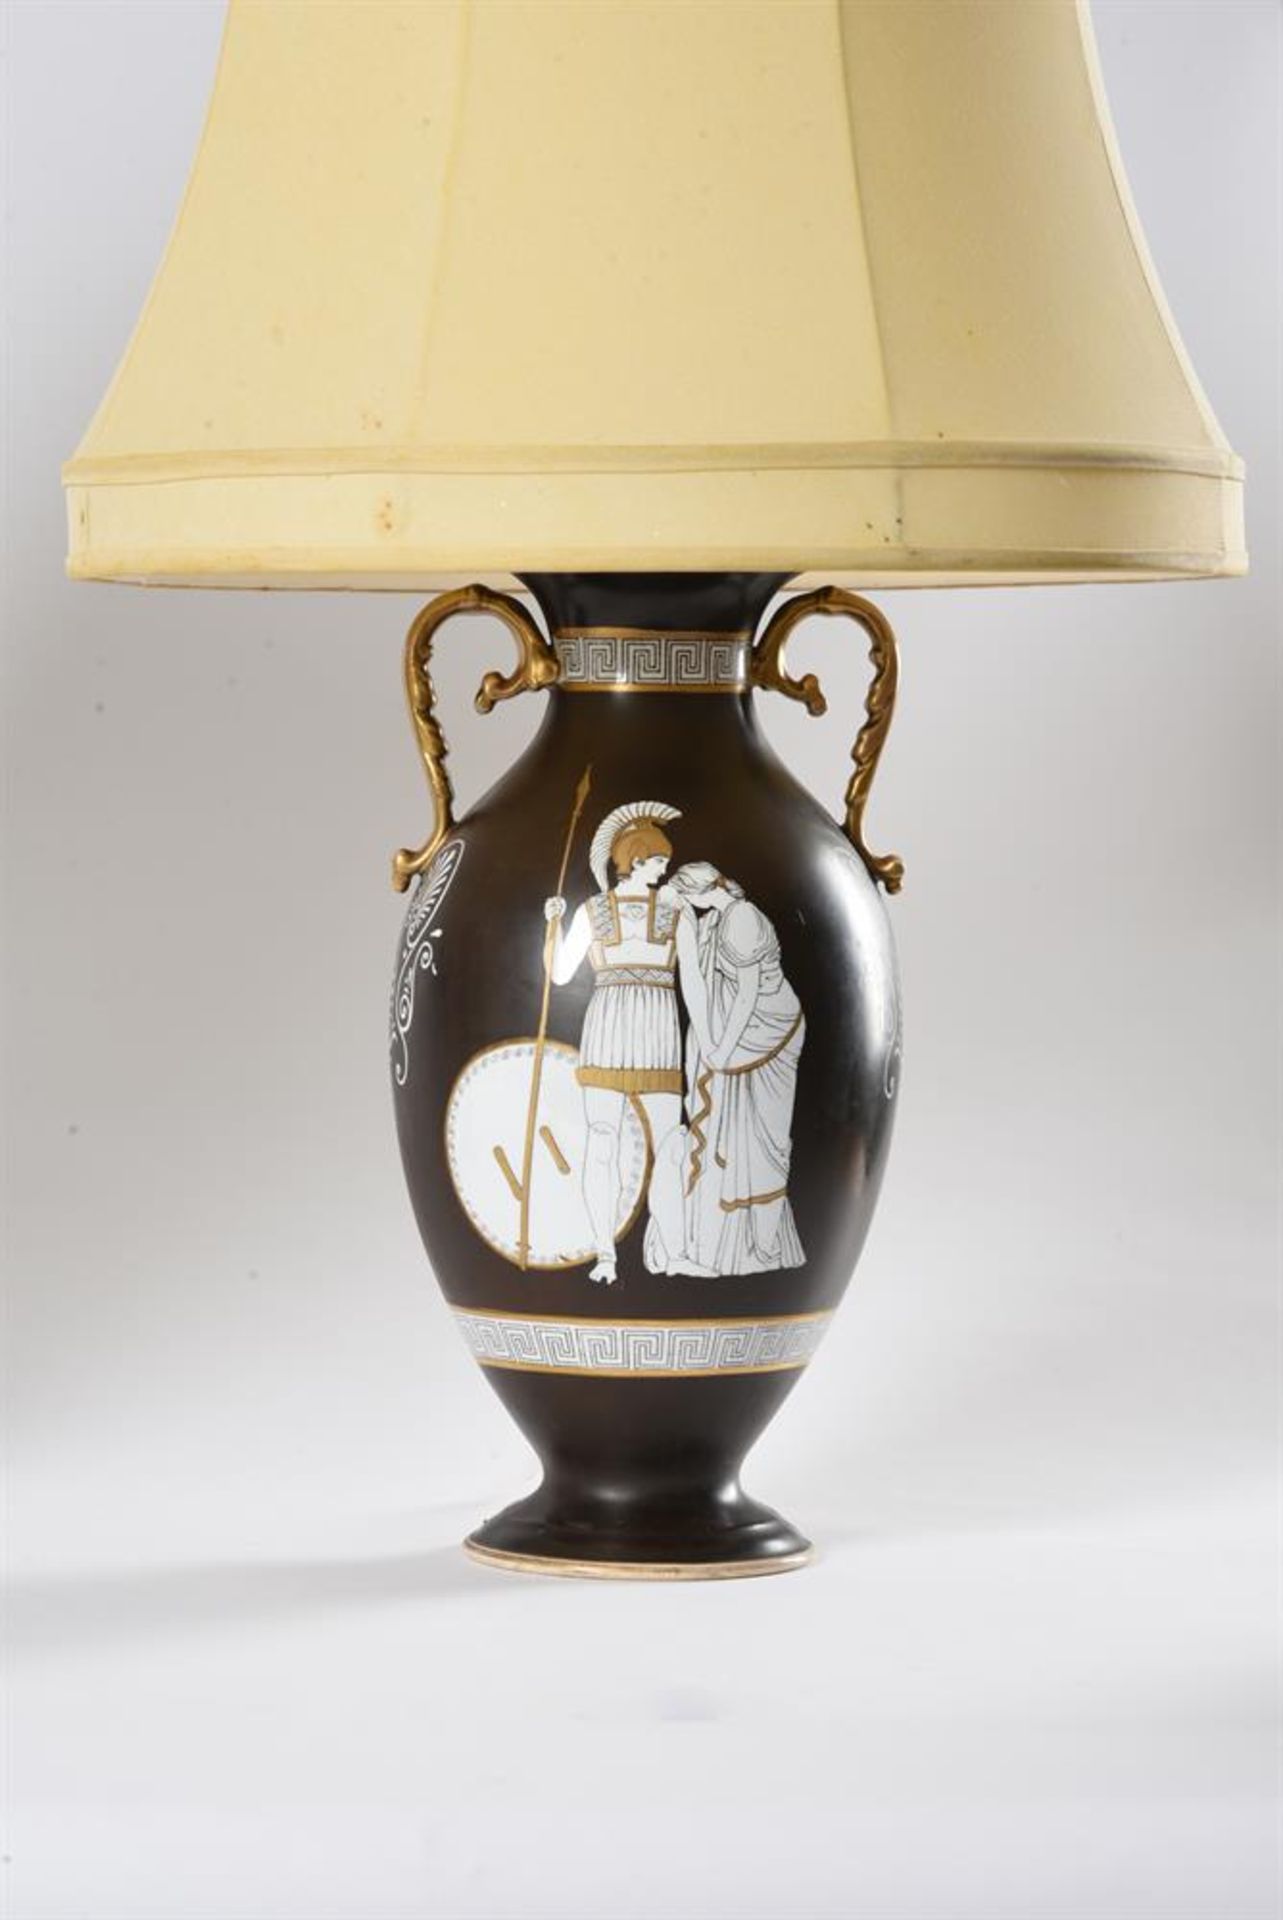 A PAIR OF PORCELAIN TABLE LAMPS DECORATED IN THE CLASSICAL TASTE - Image 2 of 2